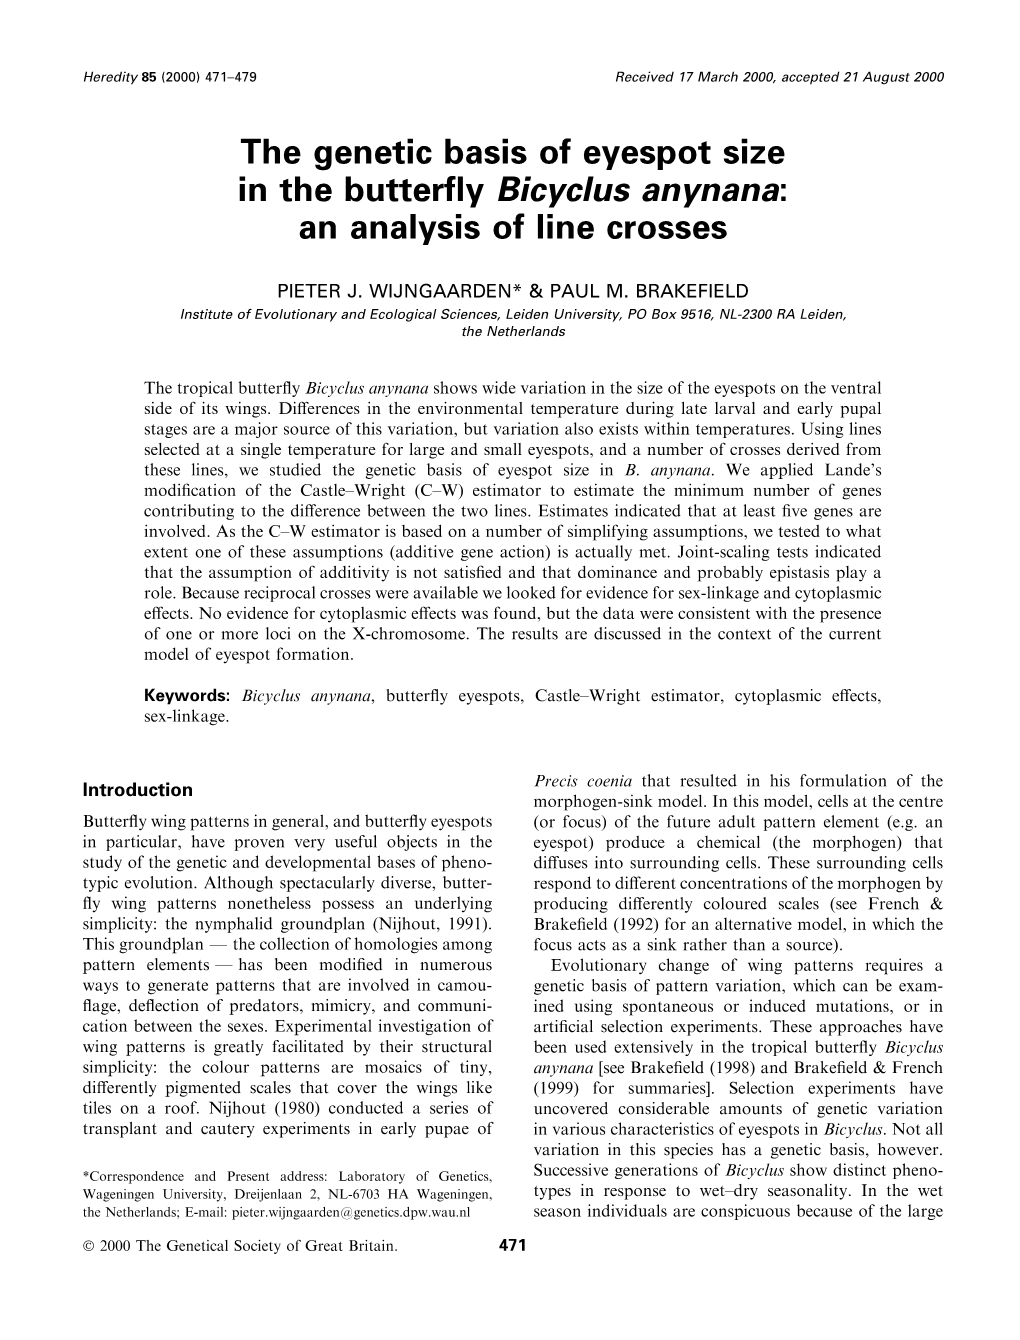 The Genetic Basis of Eyespot Size in the Butterfly Bicyclus